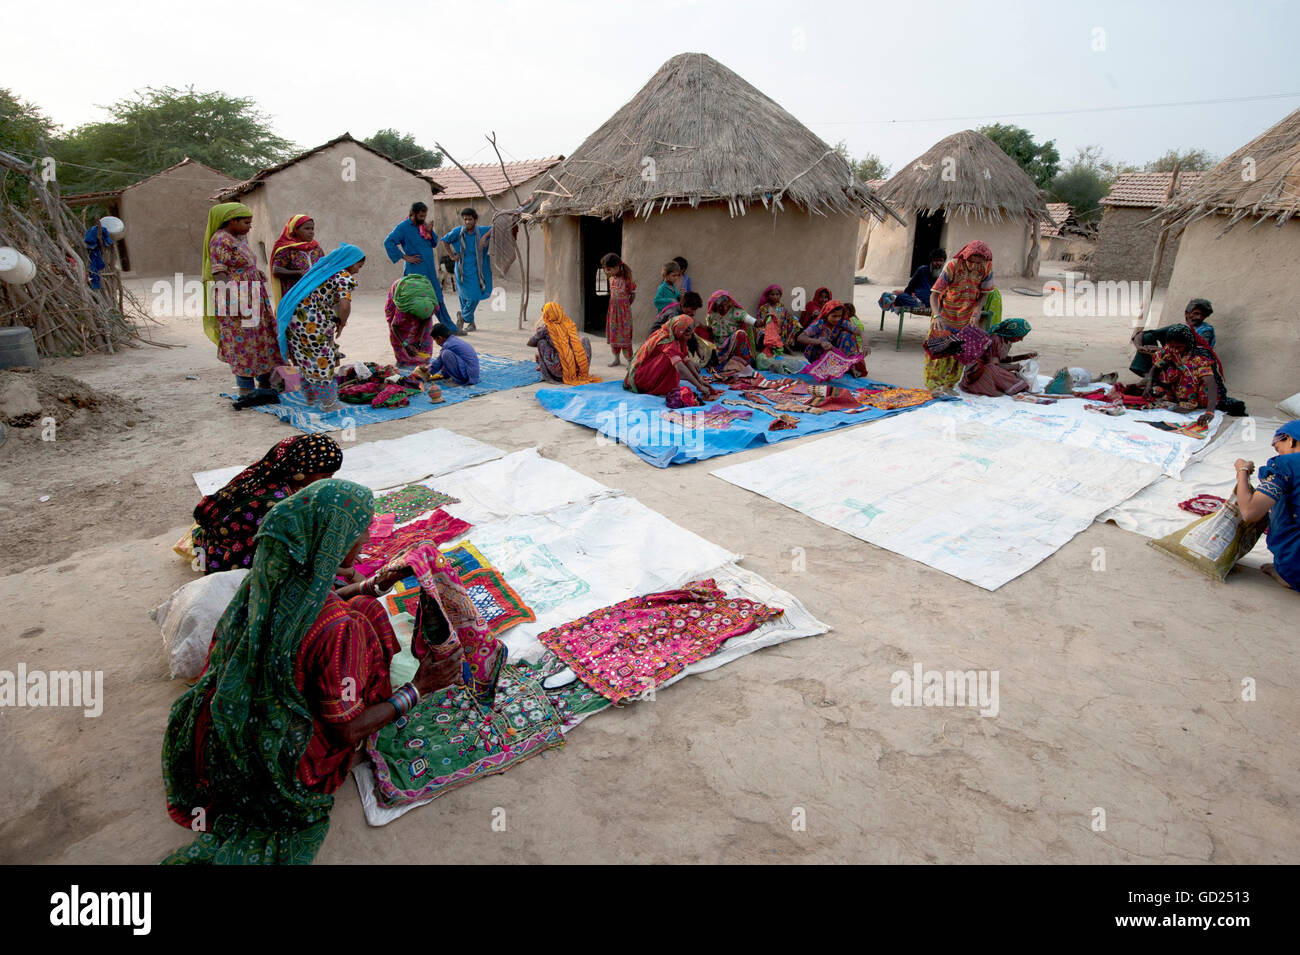 Pathan village women showing traditional embroideries in front of mud & thatched tribal houses, Jarawali, Kutch, Gujarat, India Stock Photo